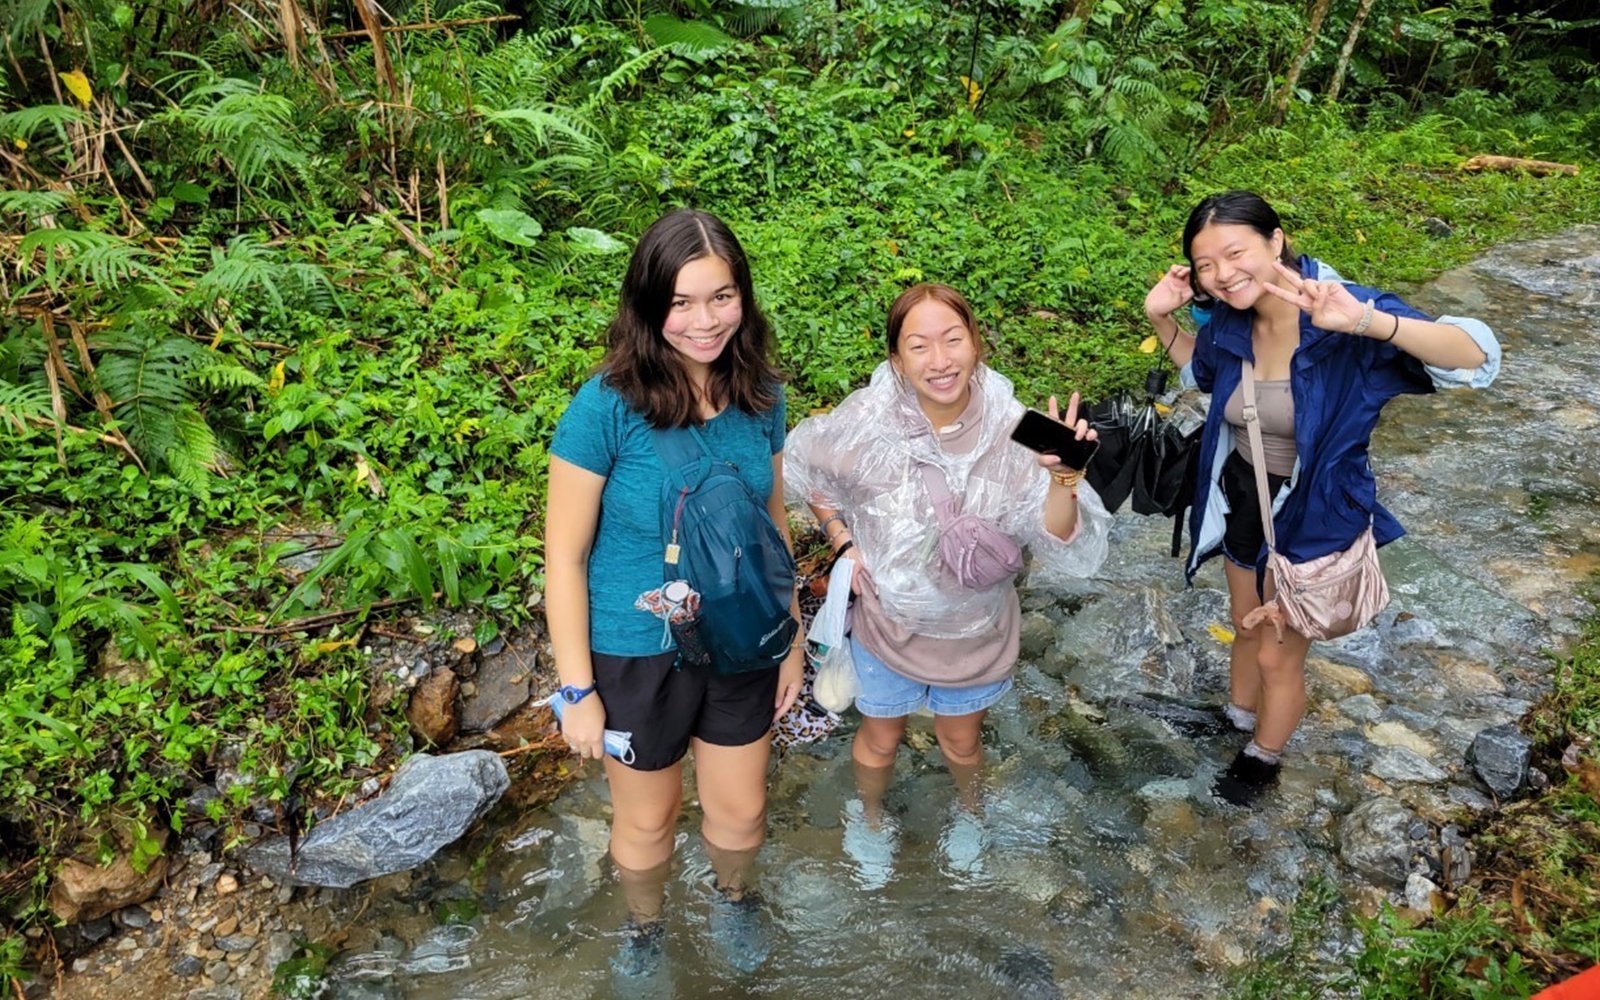 Three students standing ankle-deep in the middle of a stream with lush forest in background